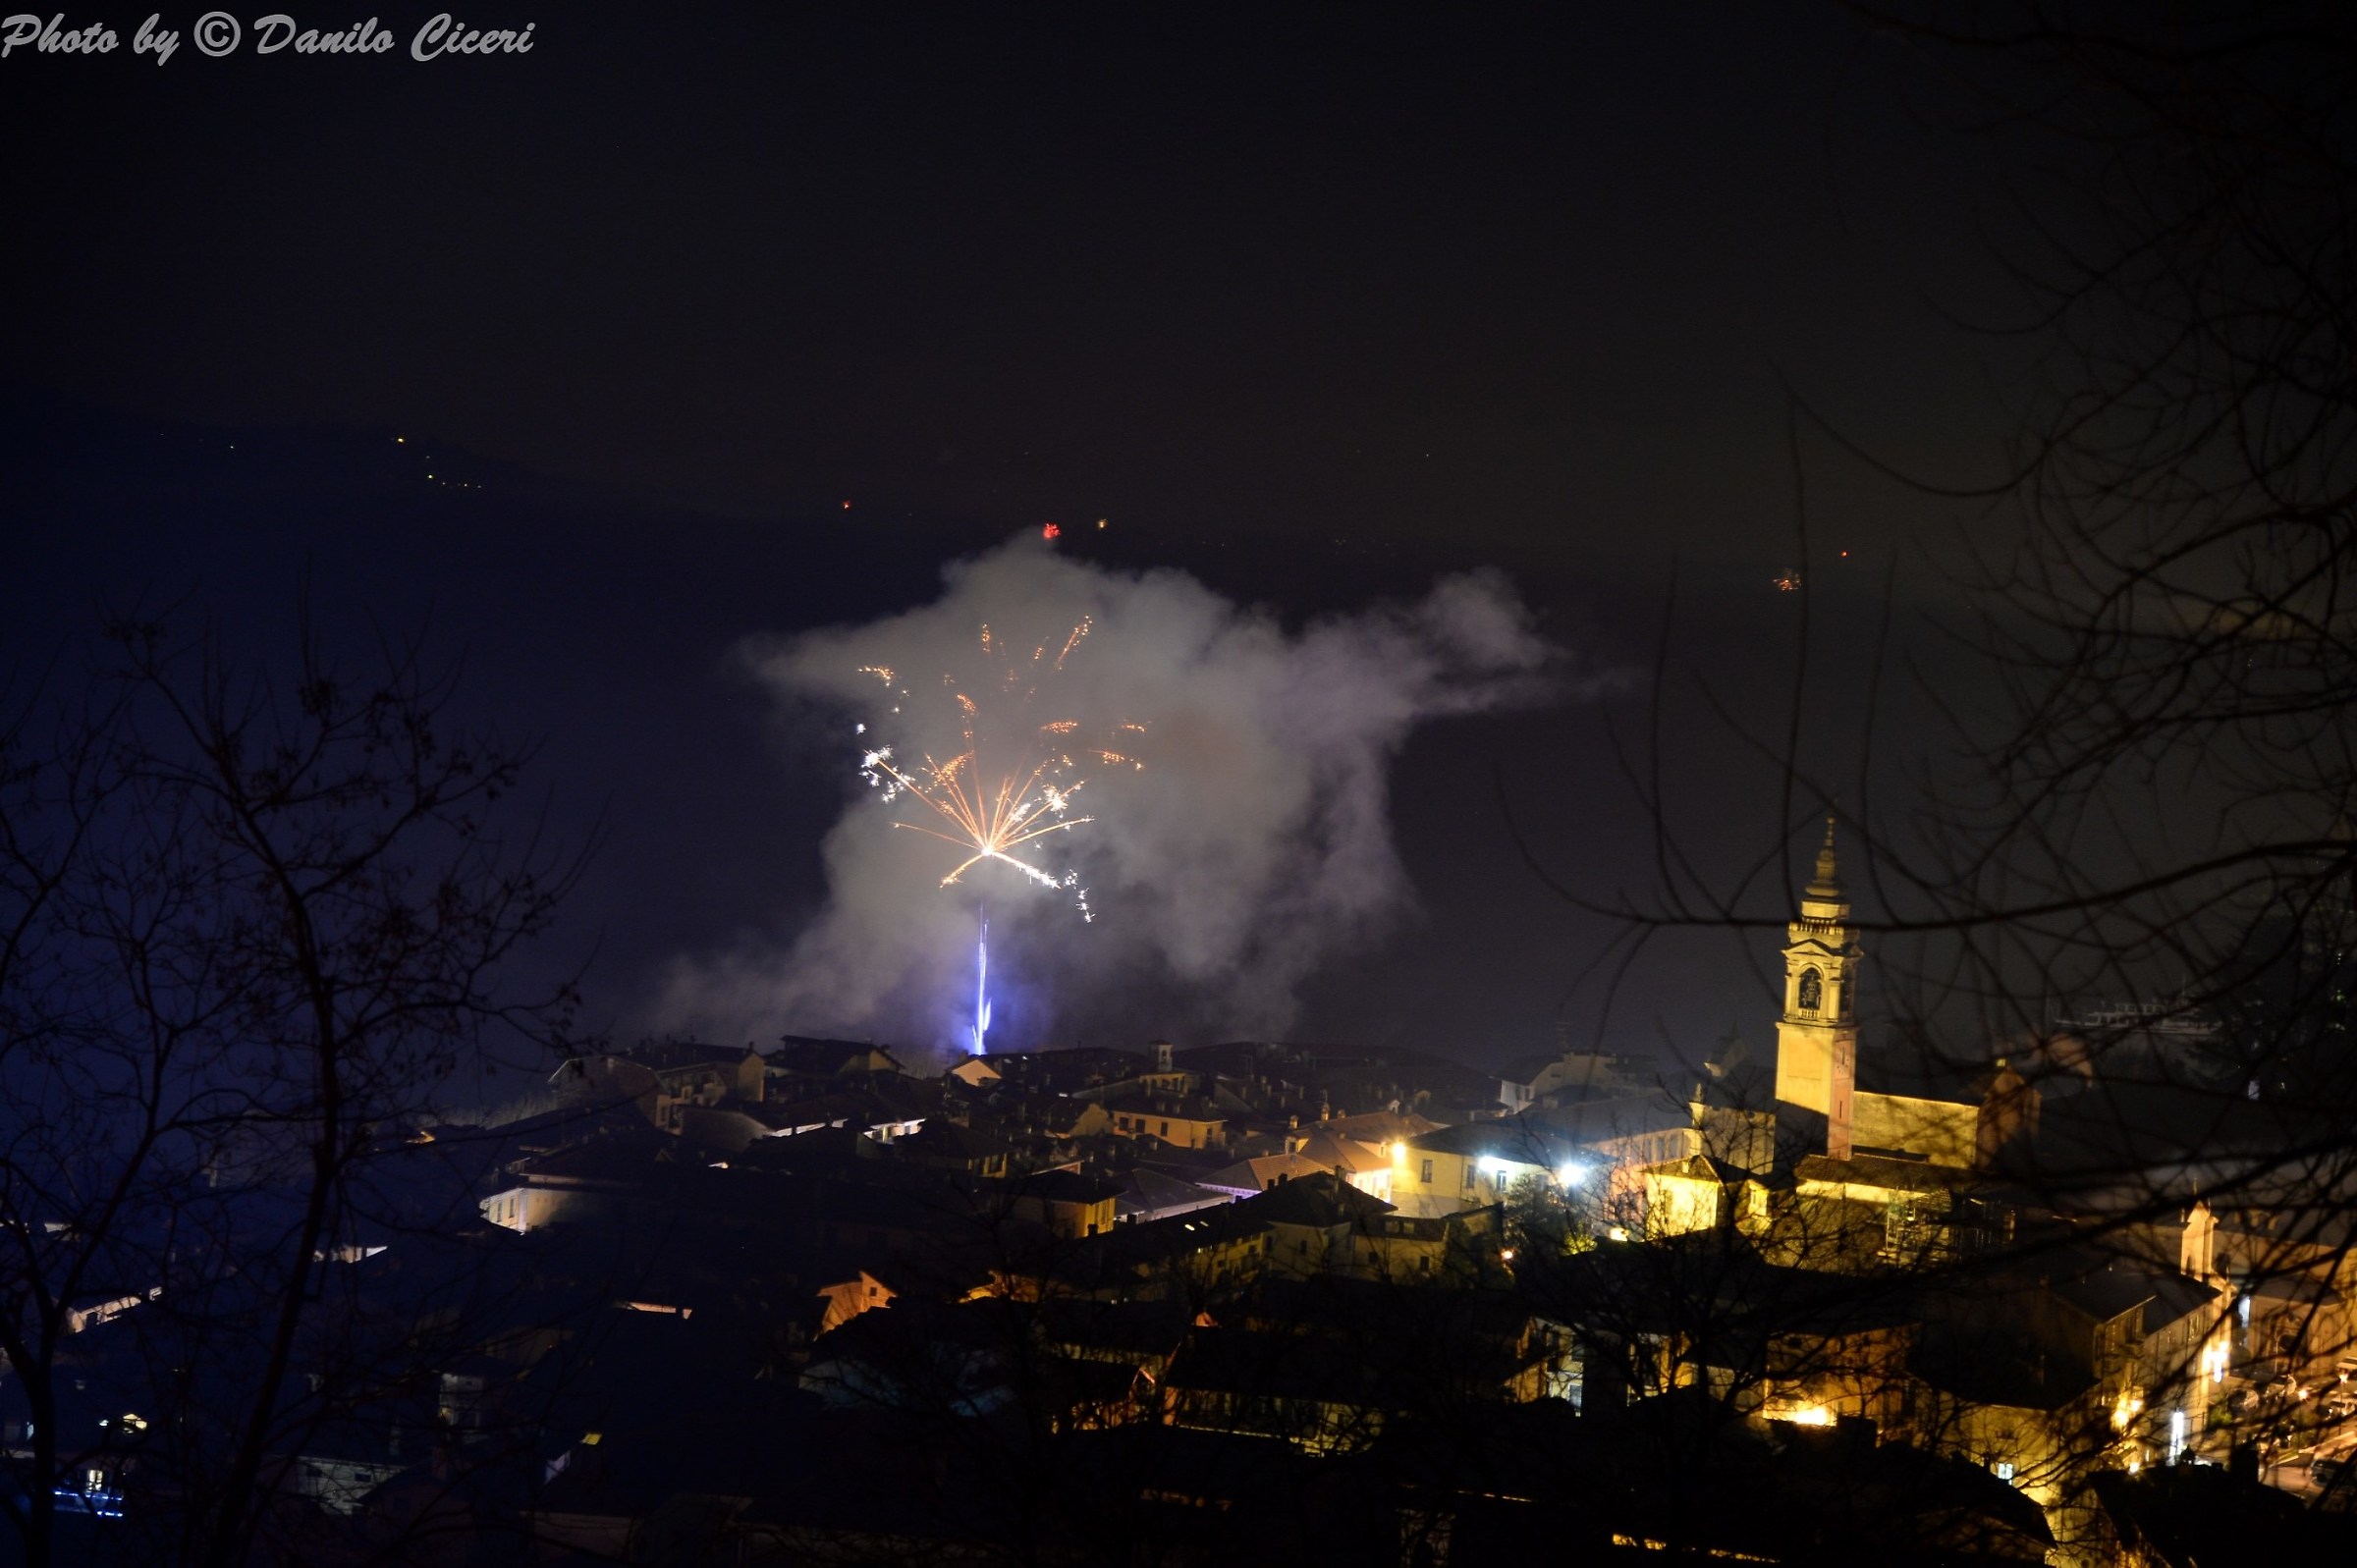 New Year in Rocca 1...